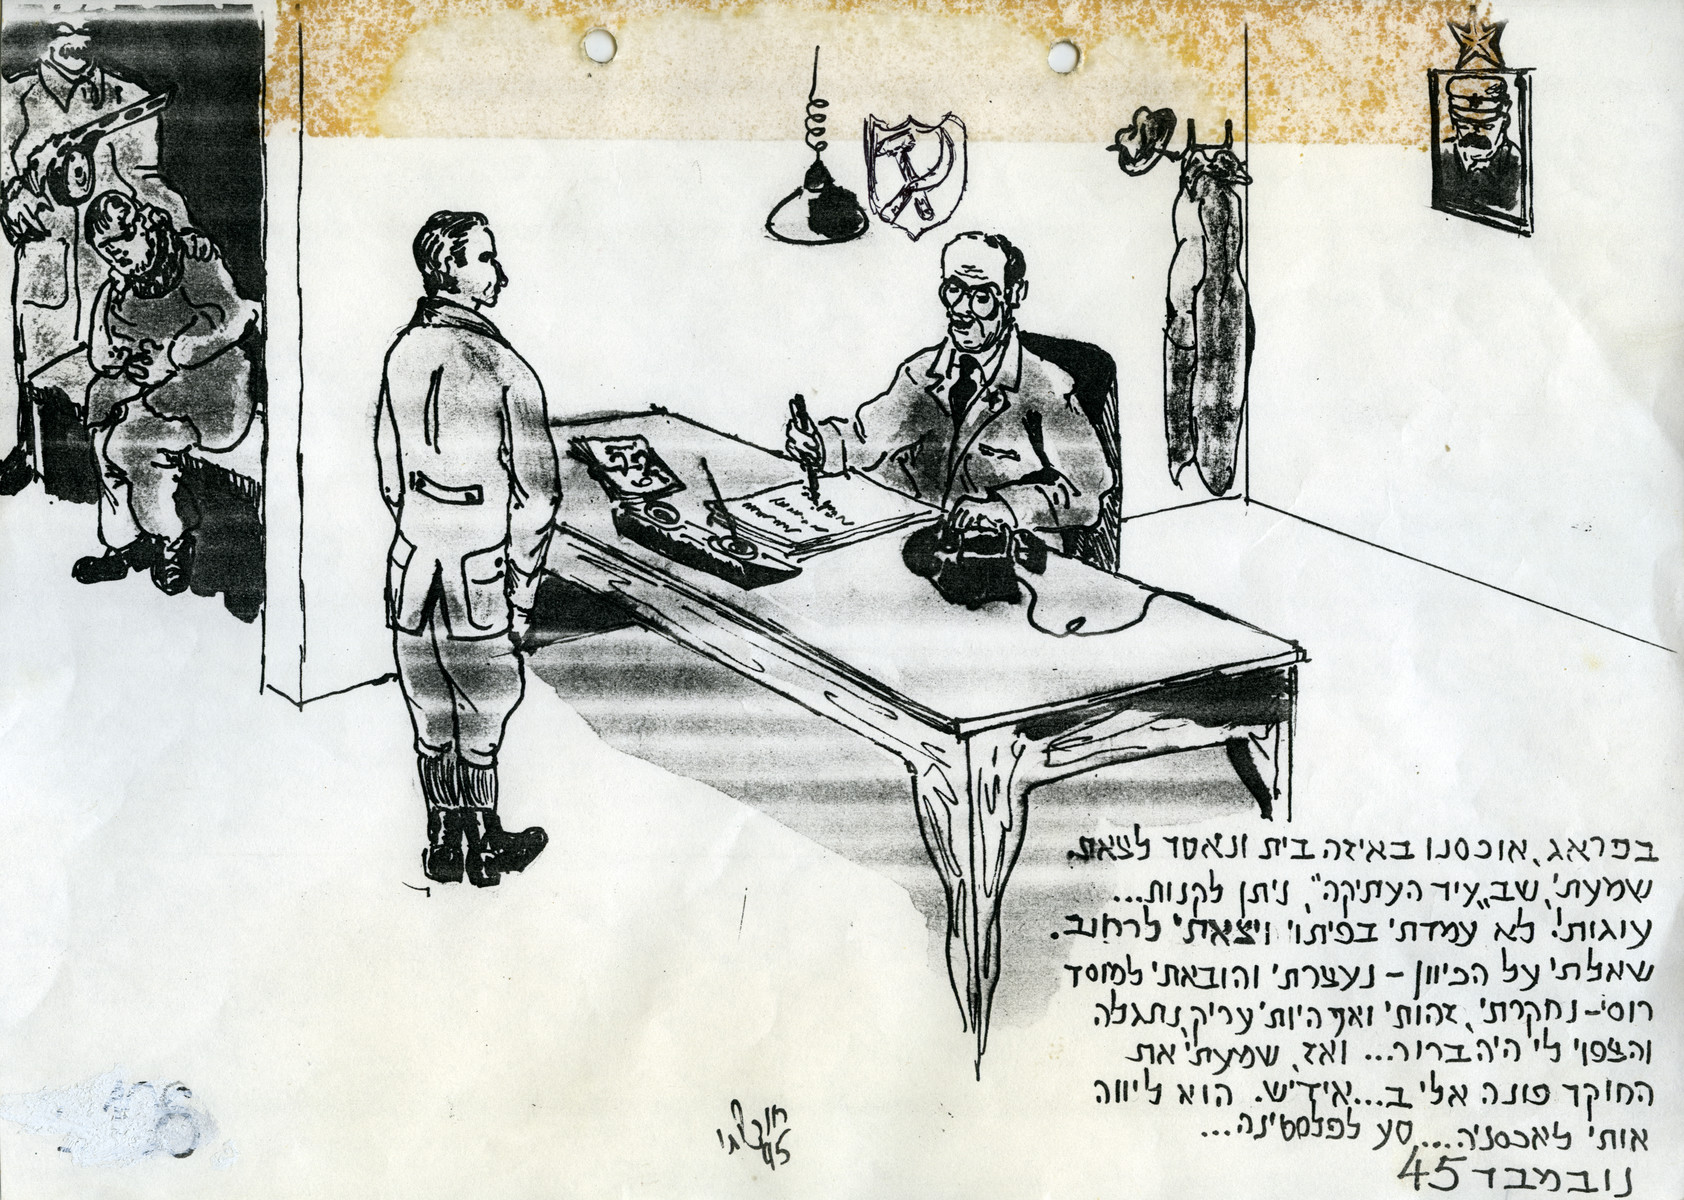 Page of a pictoral memoir drawn by the donor documenting his experiences after the Holocaust.

The drawing shows the artist being interrogated after his arrest in Czechoslovaskia.  The interrogator then spoke to him in Yiddish and told him to go to Palestine.